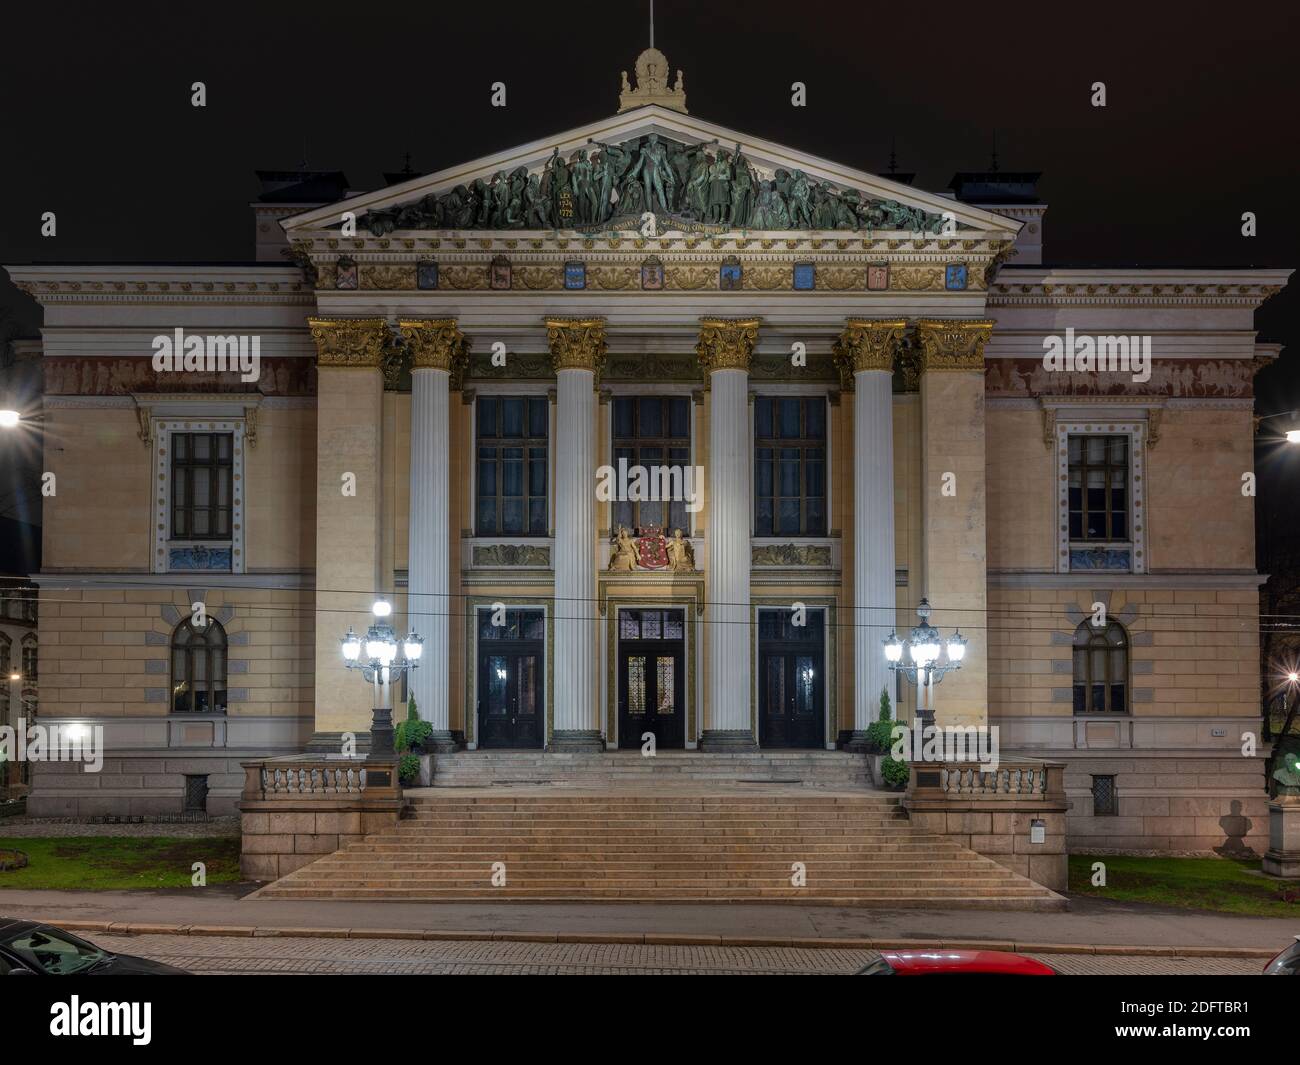 Helsinki / Finland - December 6, 2020: Illuminated governmental building, the House of the Estates, in downtown Helsinki Stock Photo